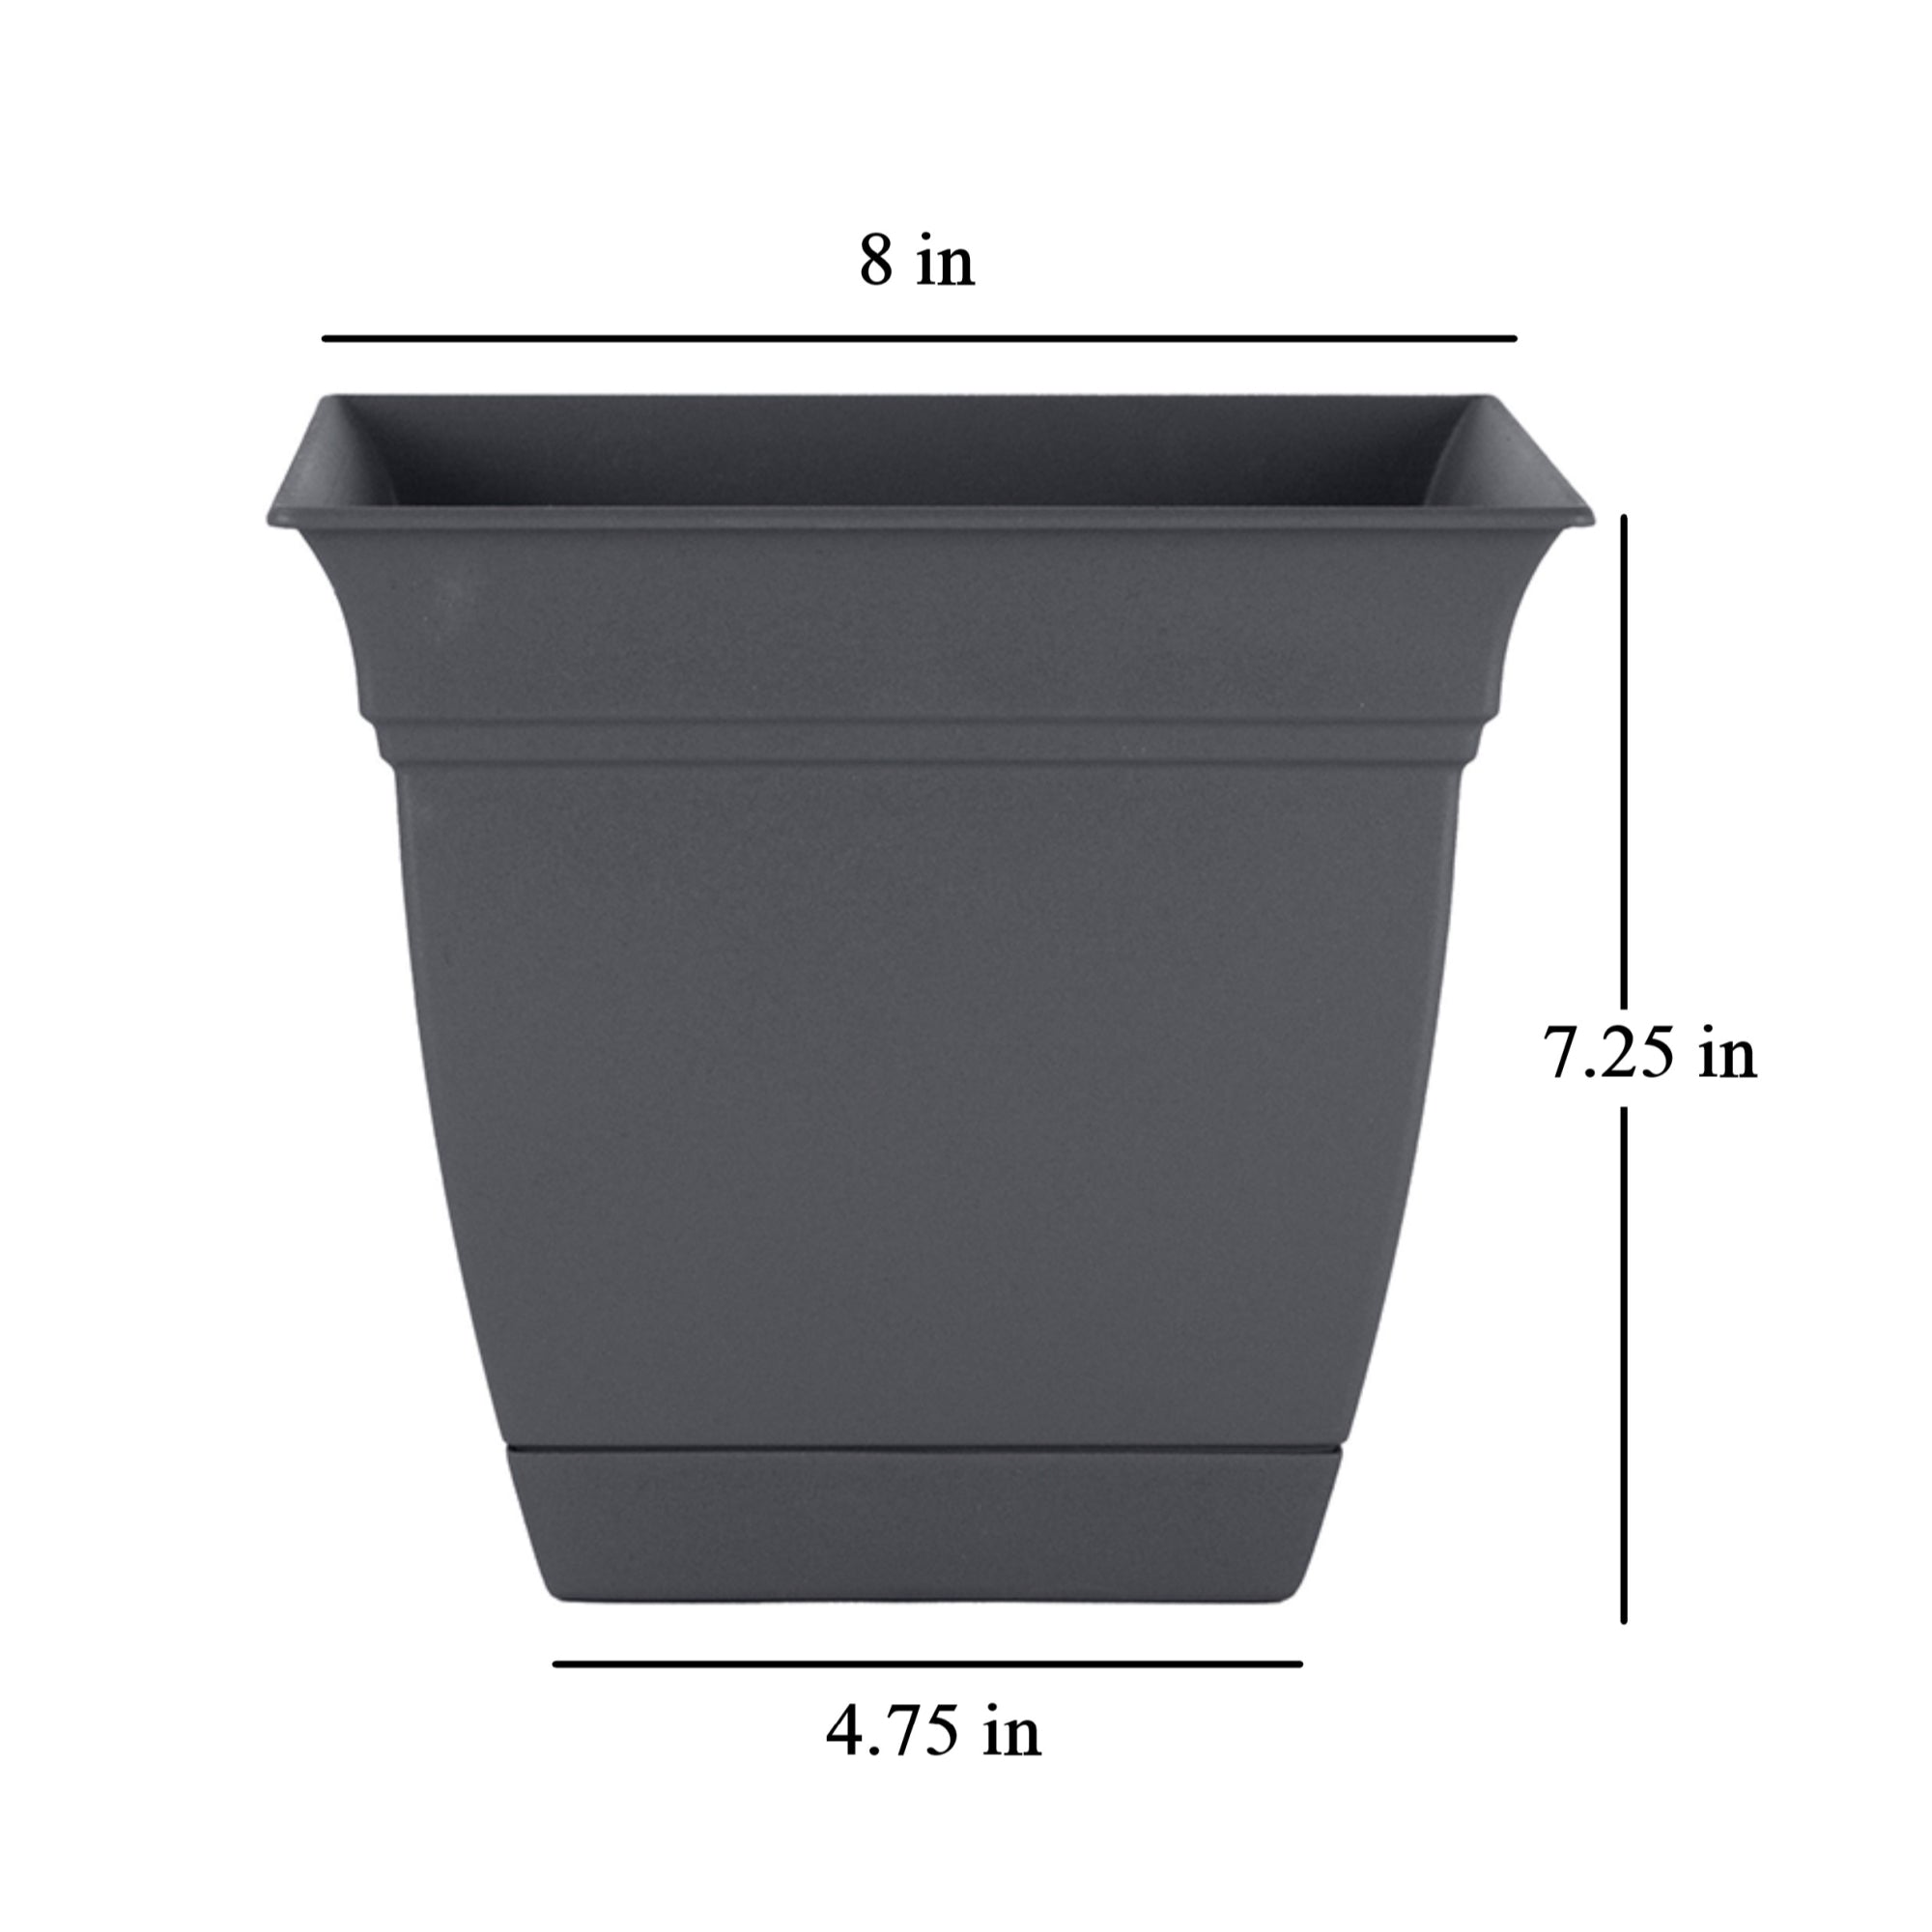 The HC Comp Indoor/Outdoor Plastic Eclipse Square Planter with Attached Saucer, 8"